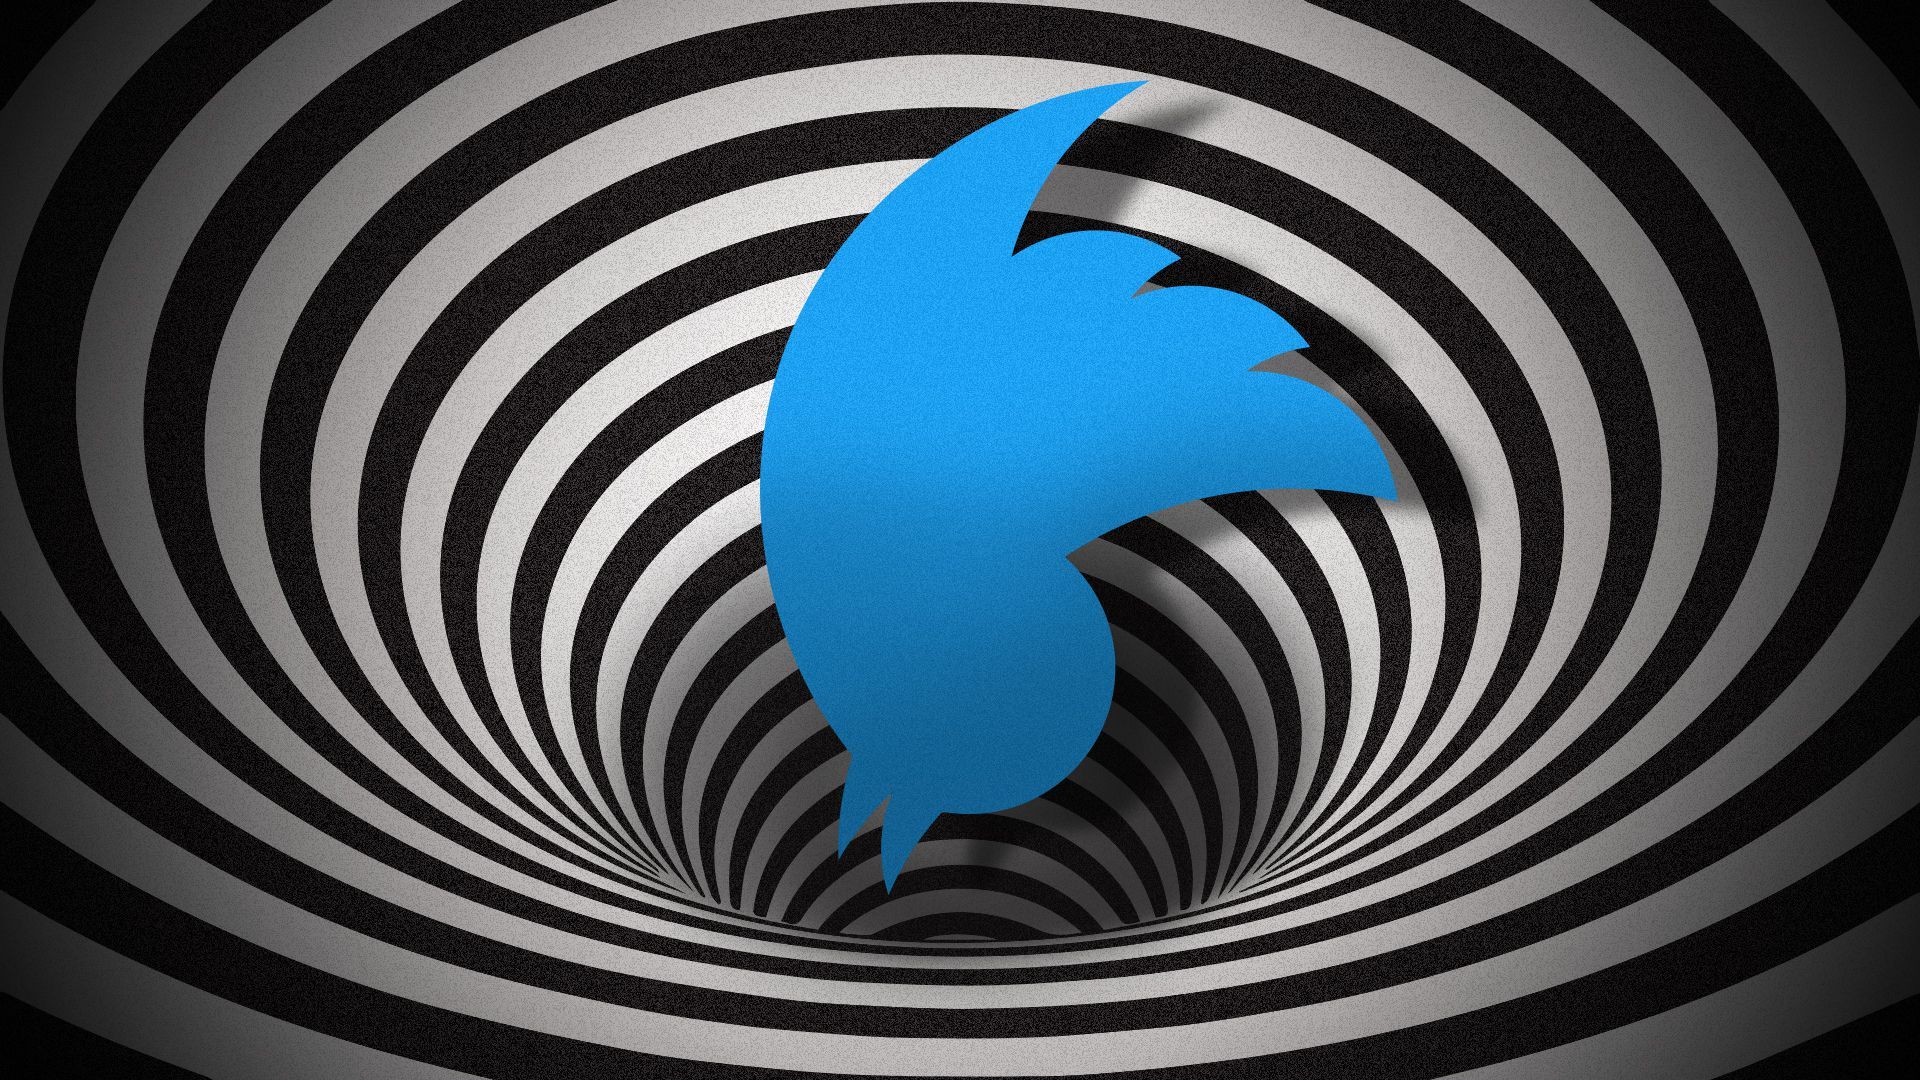 Illustration of the Twitter logo falling into a hypnotic spiral.